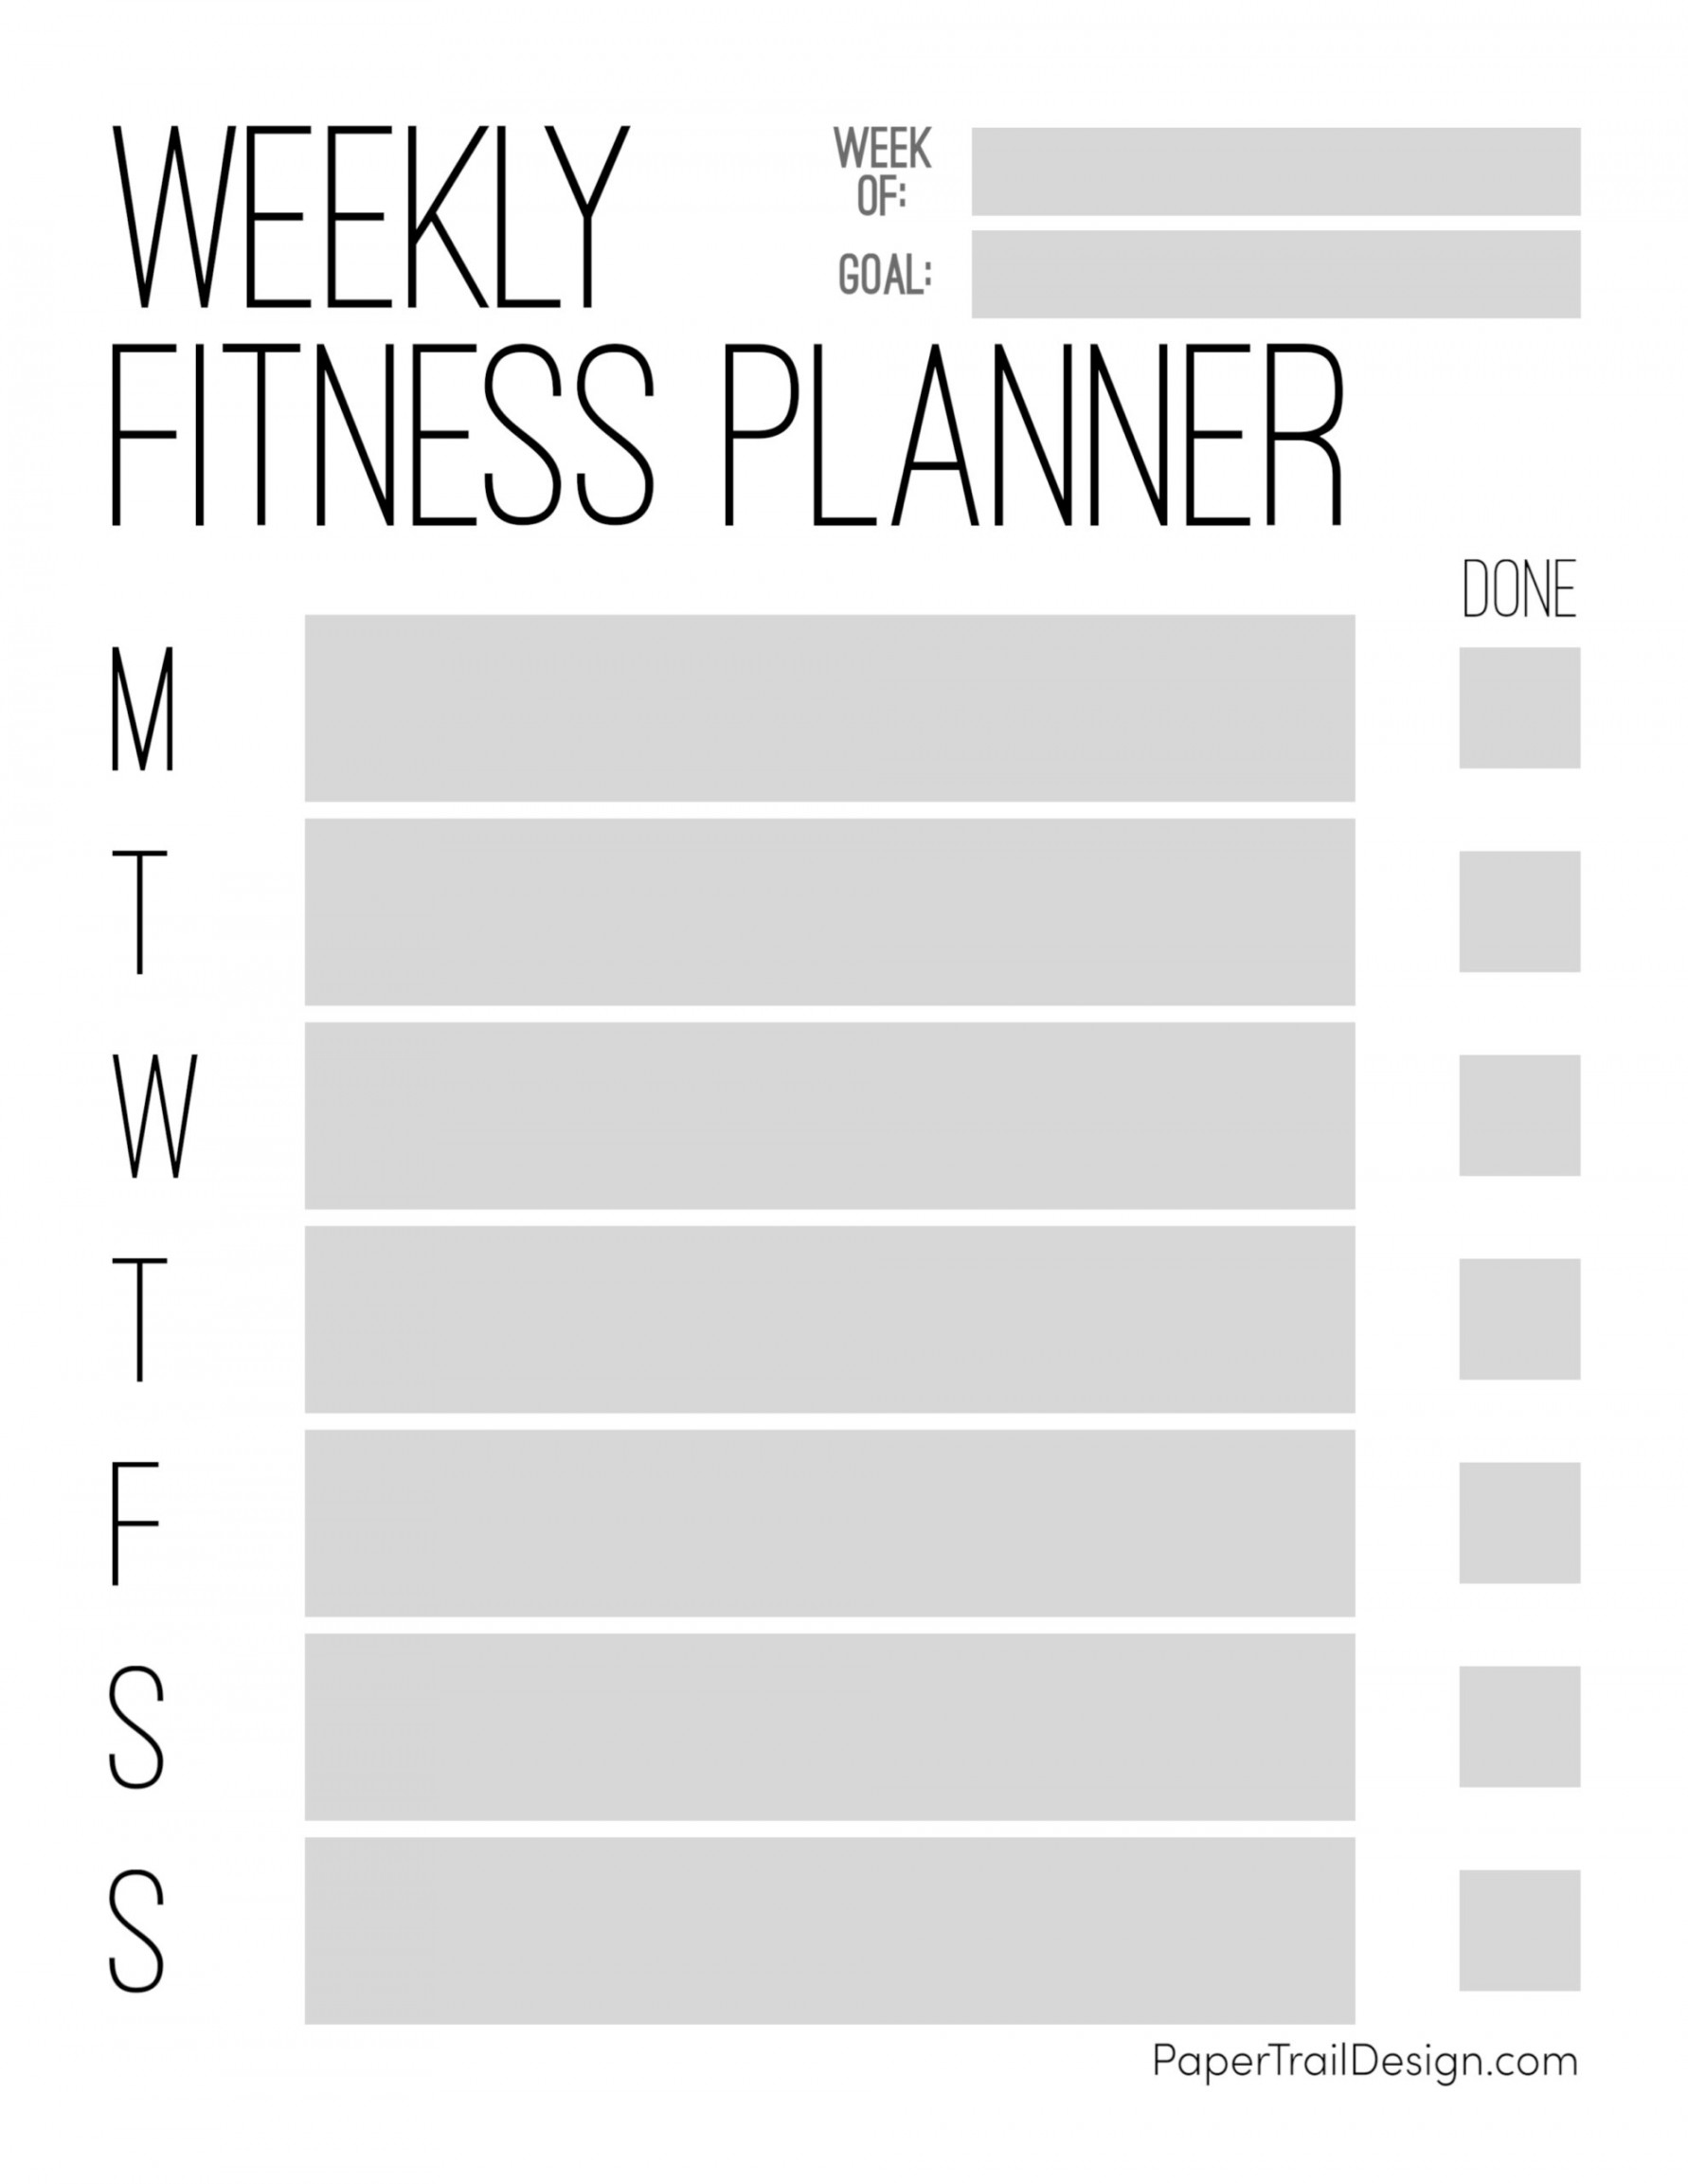 Weekly Fitness Planner Printable - Paper Trail Design